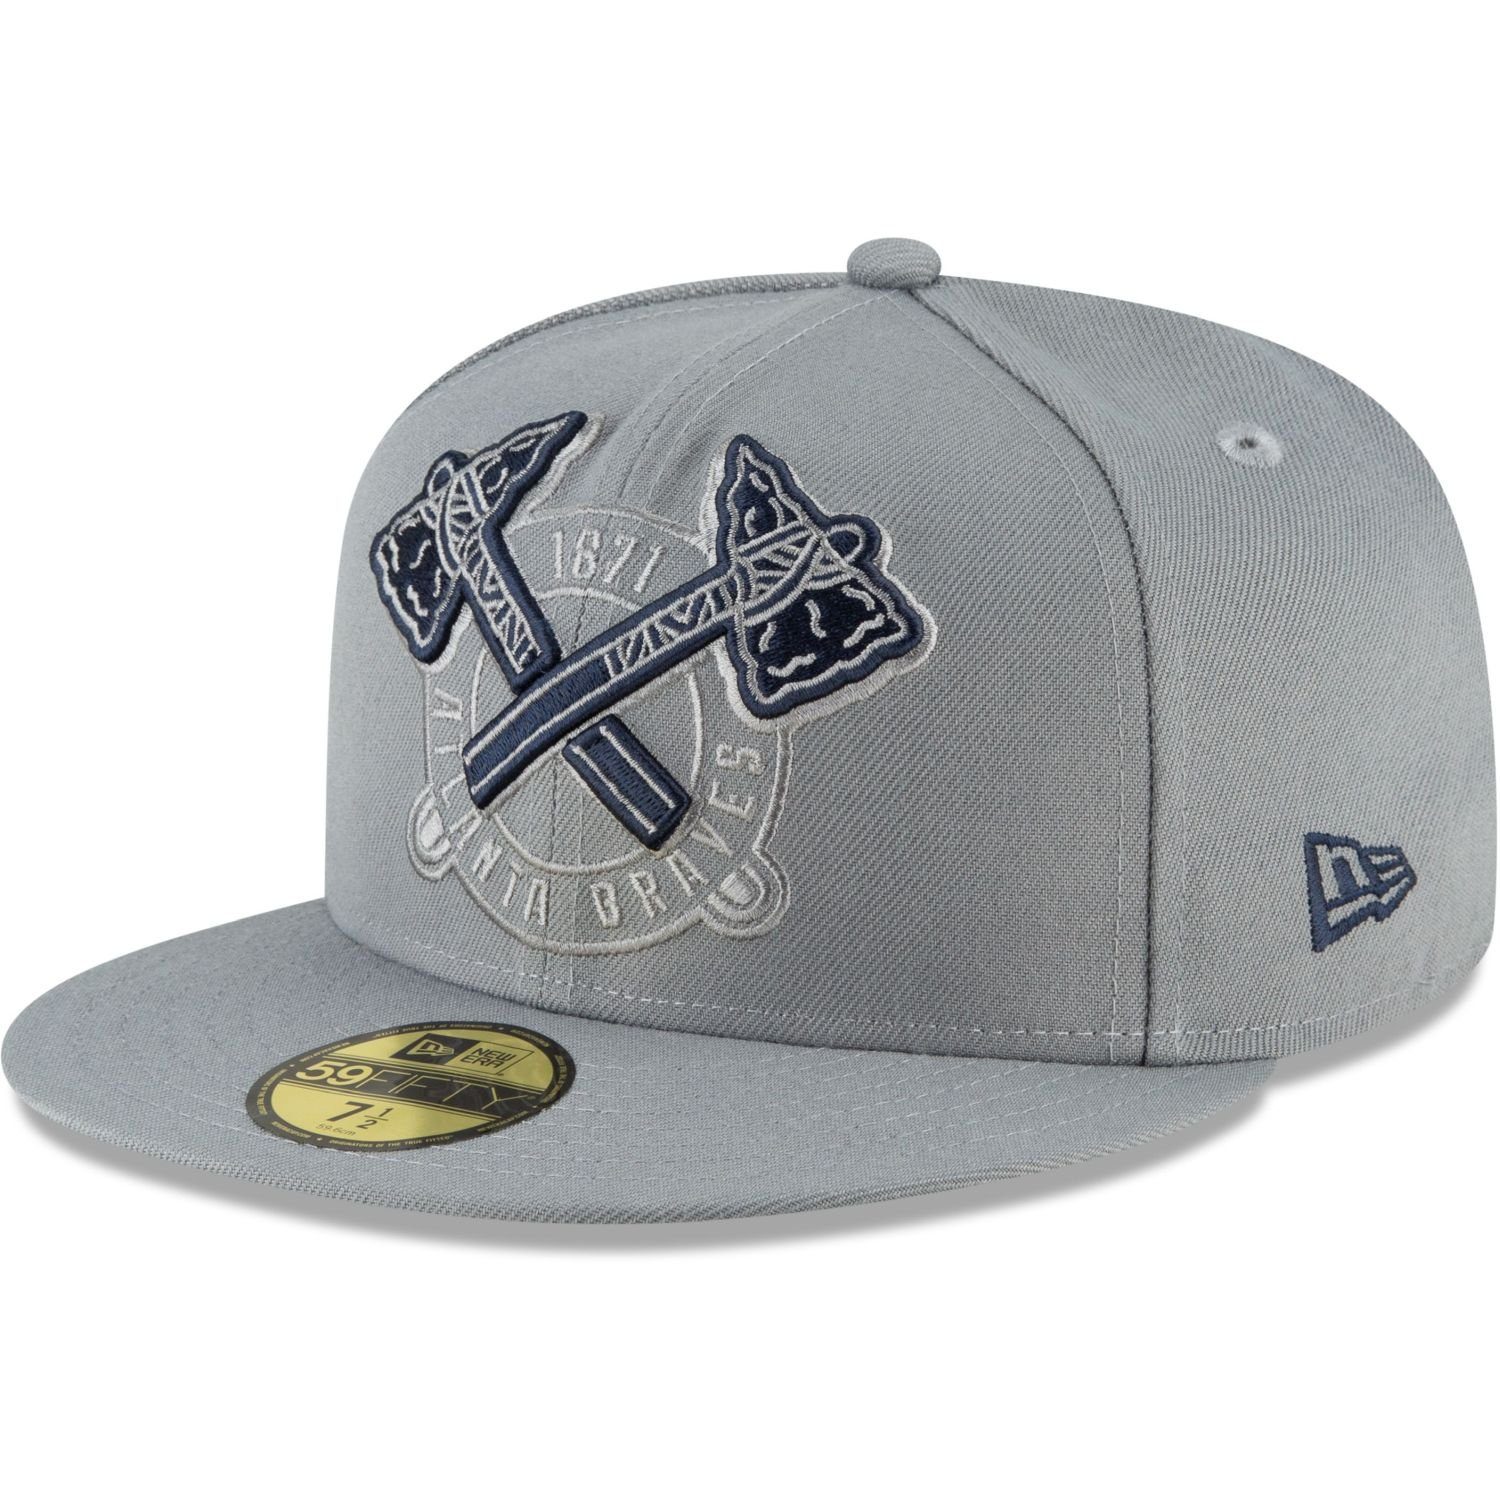 Team Era GREY Atlanta Cooperstown Braves MLB Cap STORM 59Fifty New Fitted